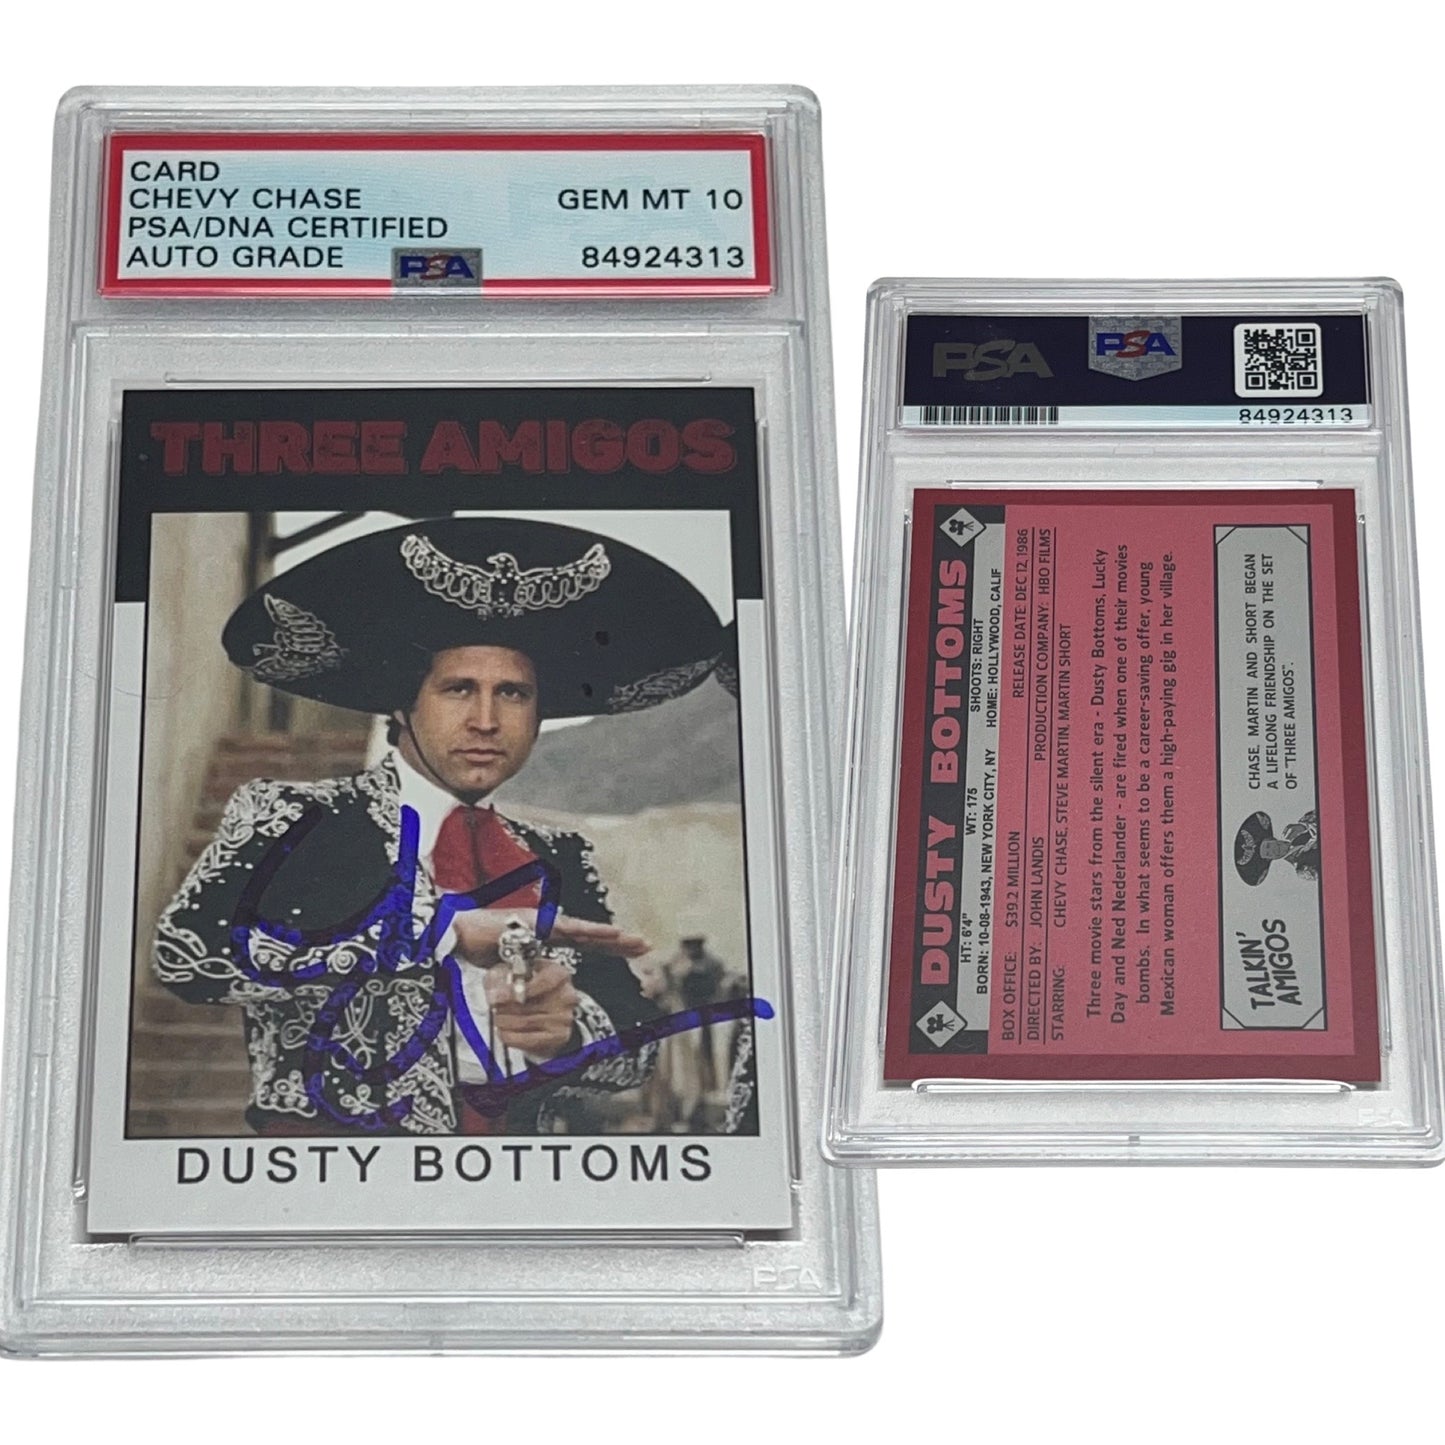 Chevy Chase Three Amigos Dusty Bottoms Autographed Card PSA Auto GEM MINT 10